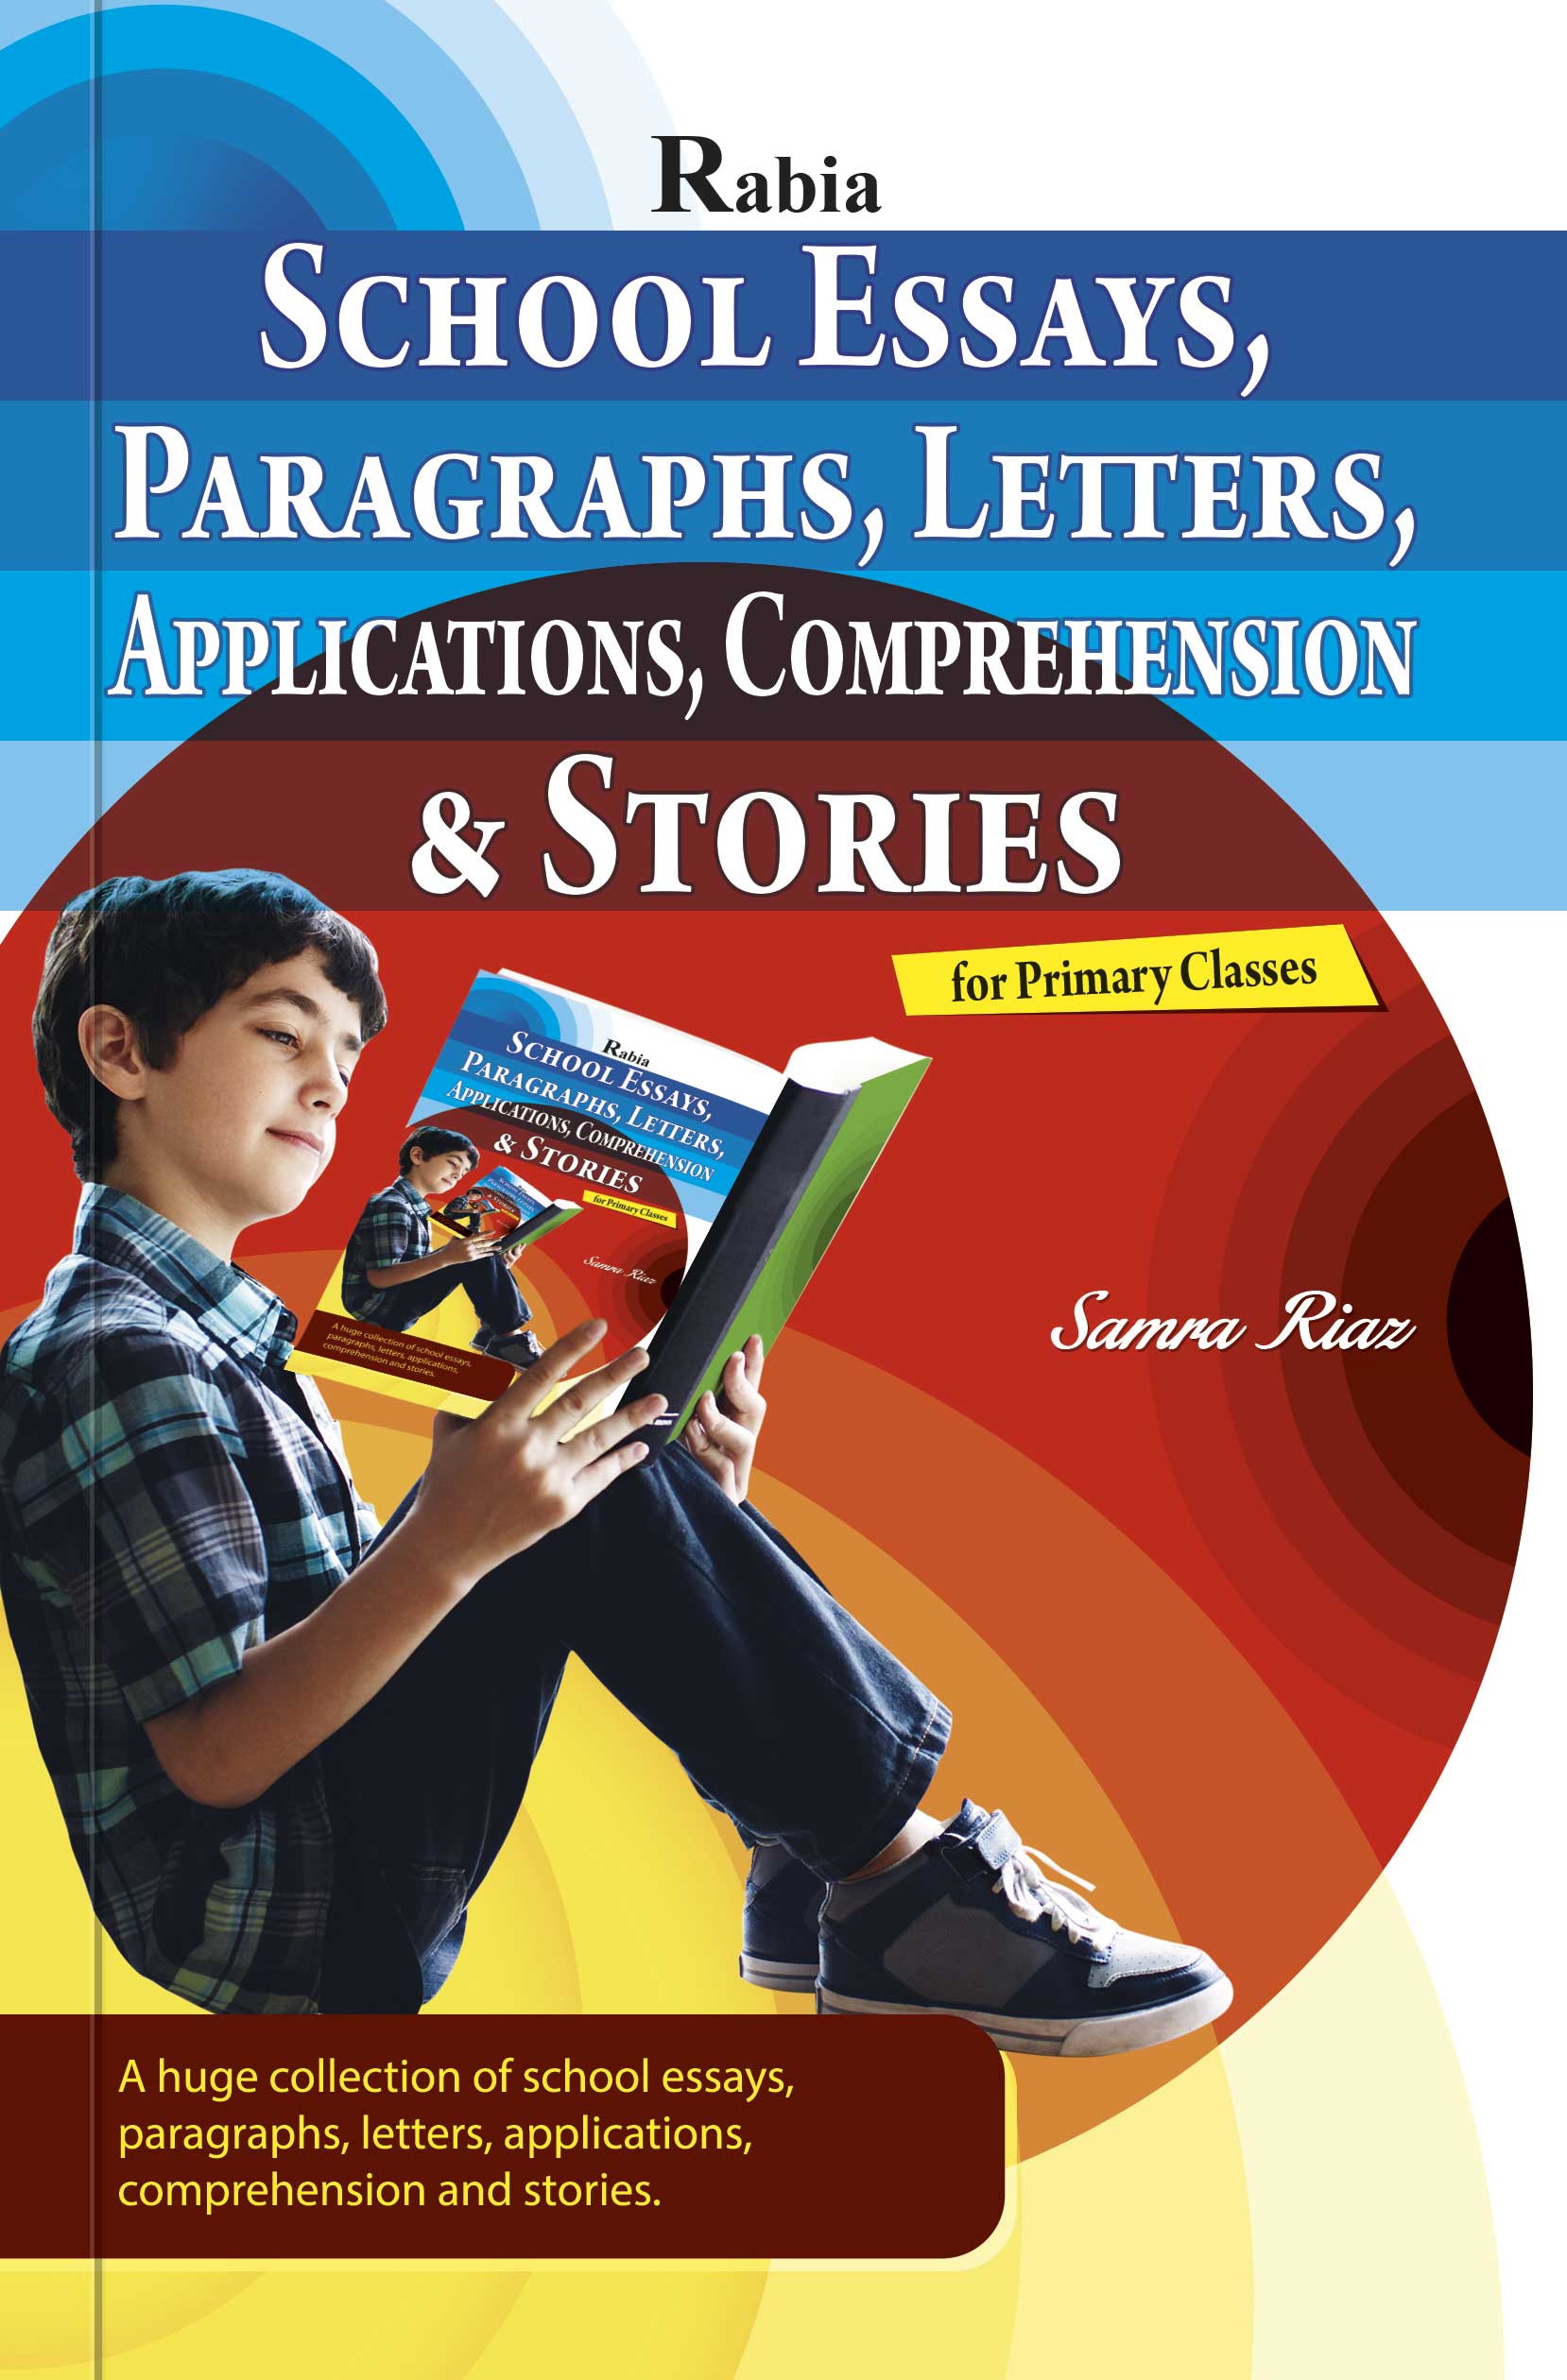 school essays and letters book pdf